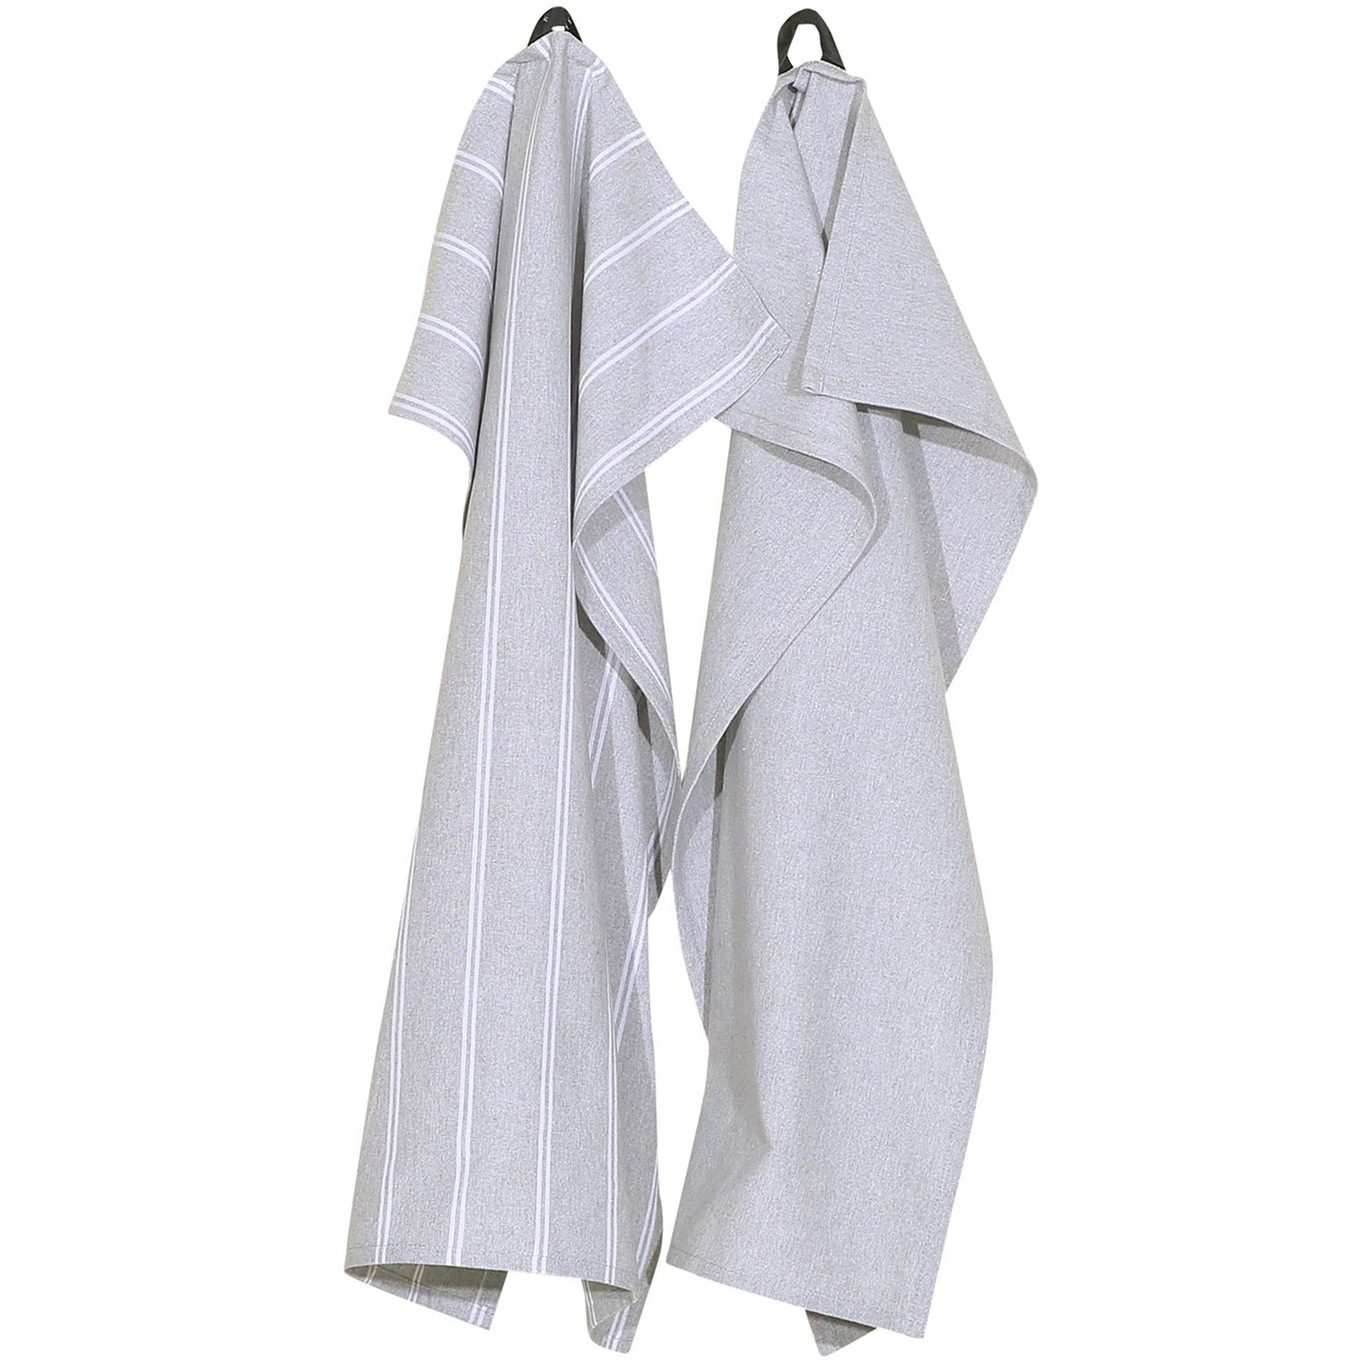 Recycled by Wille Agda Kitchen Towel 2-Pack 50x70 cm - Kitchen Towels Cotton Grey - 43135